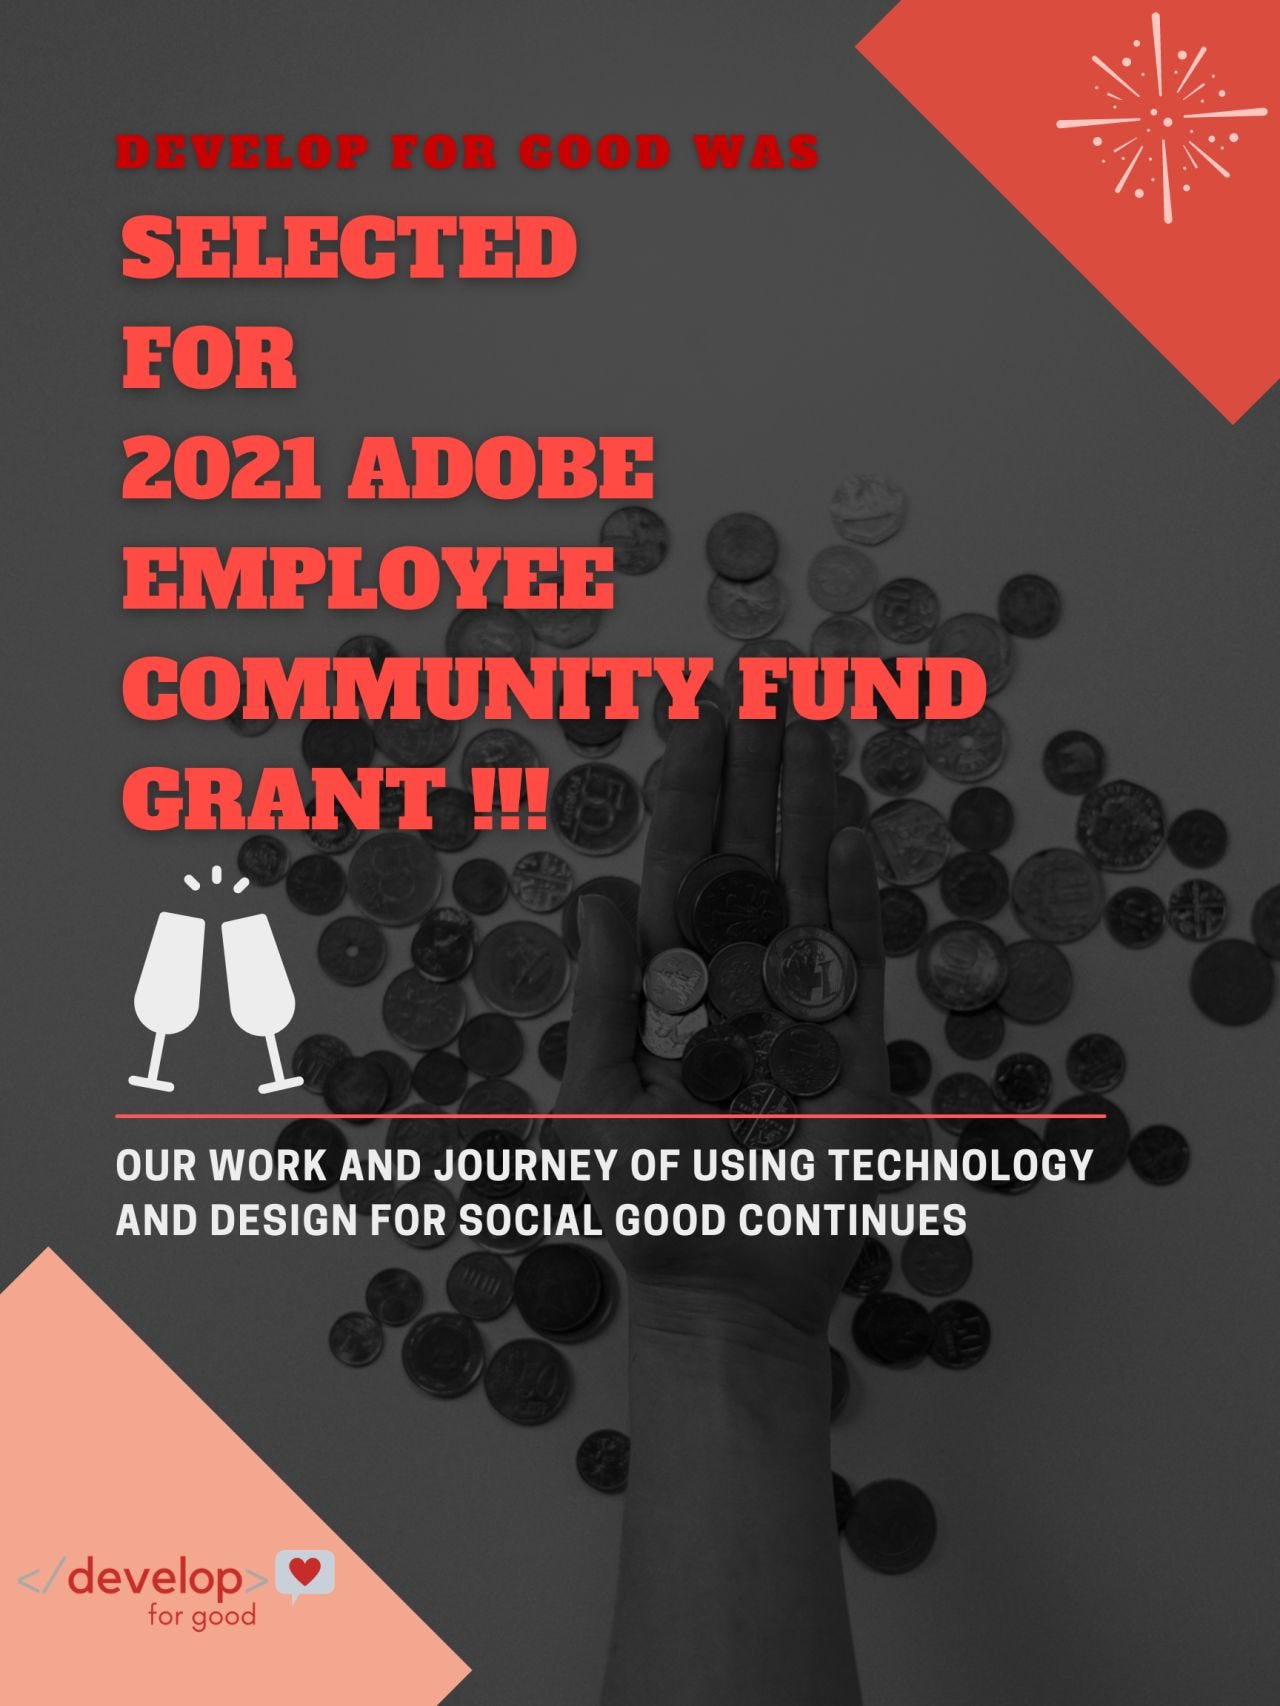 Develop for Good was selected for the 2021 Adobe Employee Community Fund grant. 